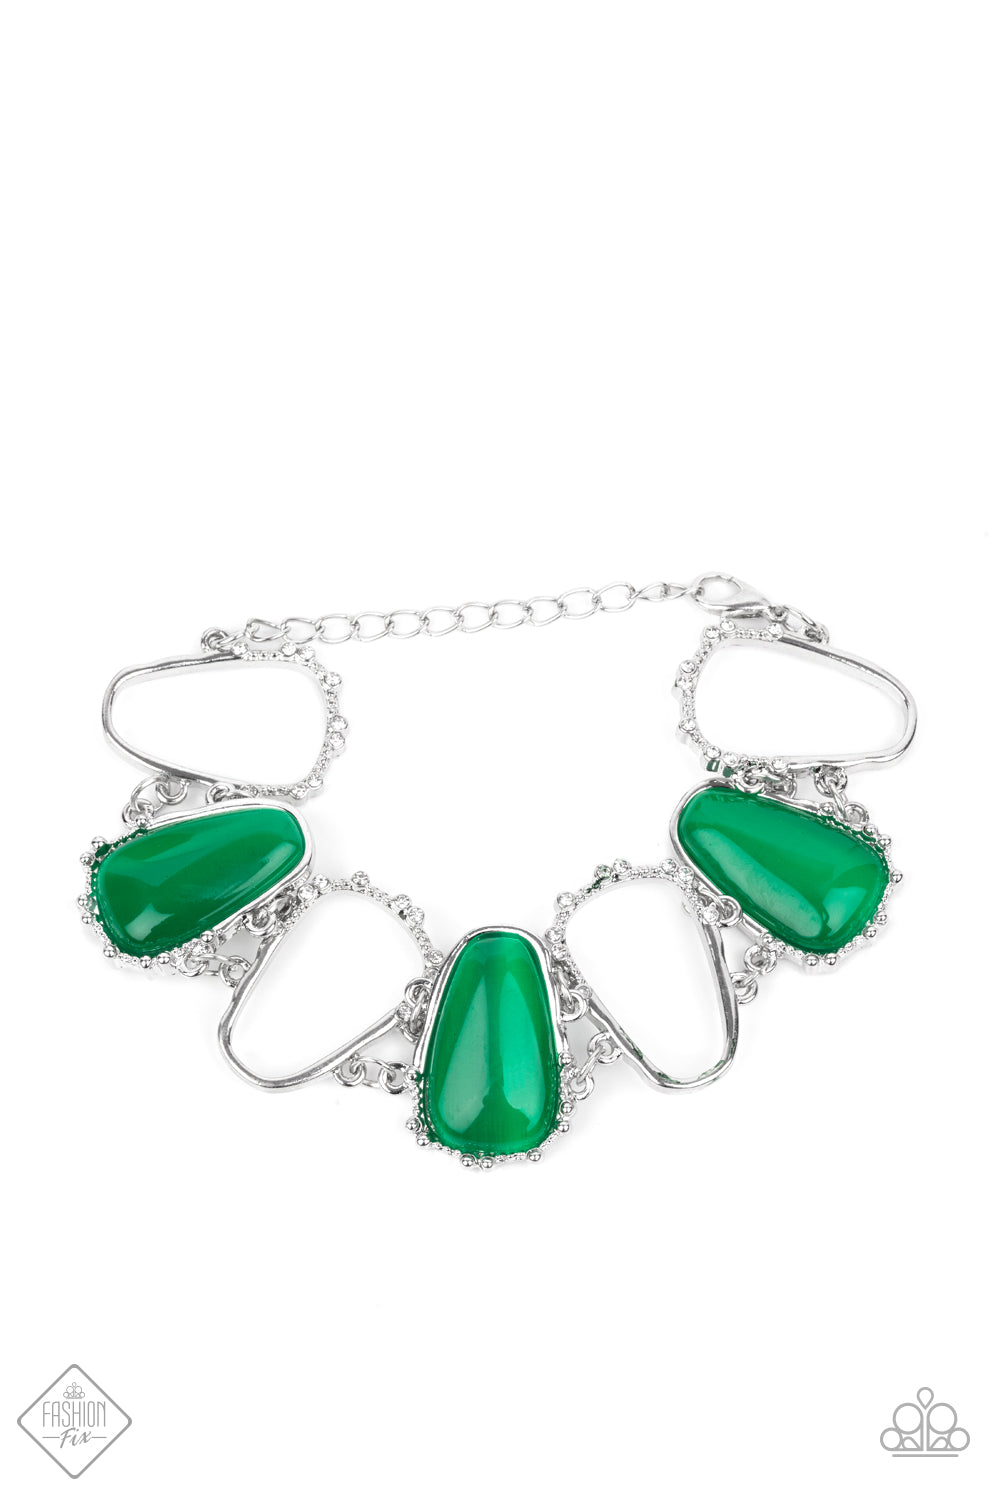 Yacht Club Couture Green Bracelet - Paparazzi Accessories